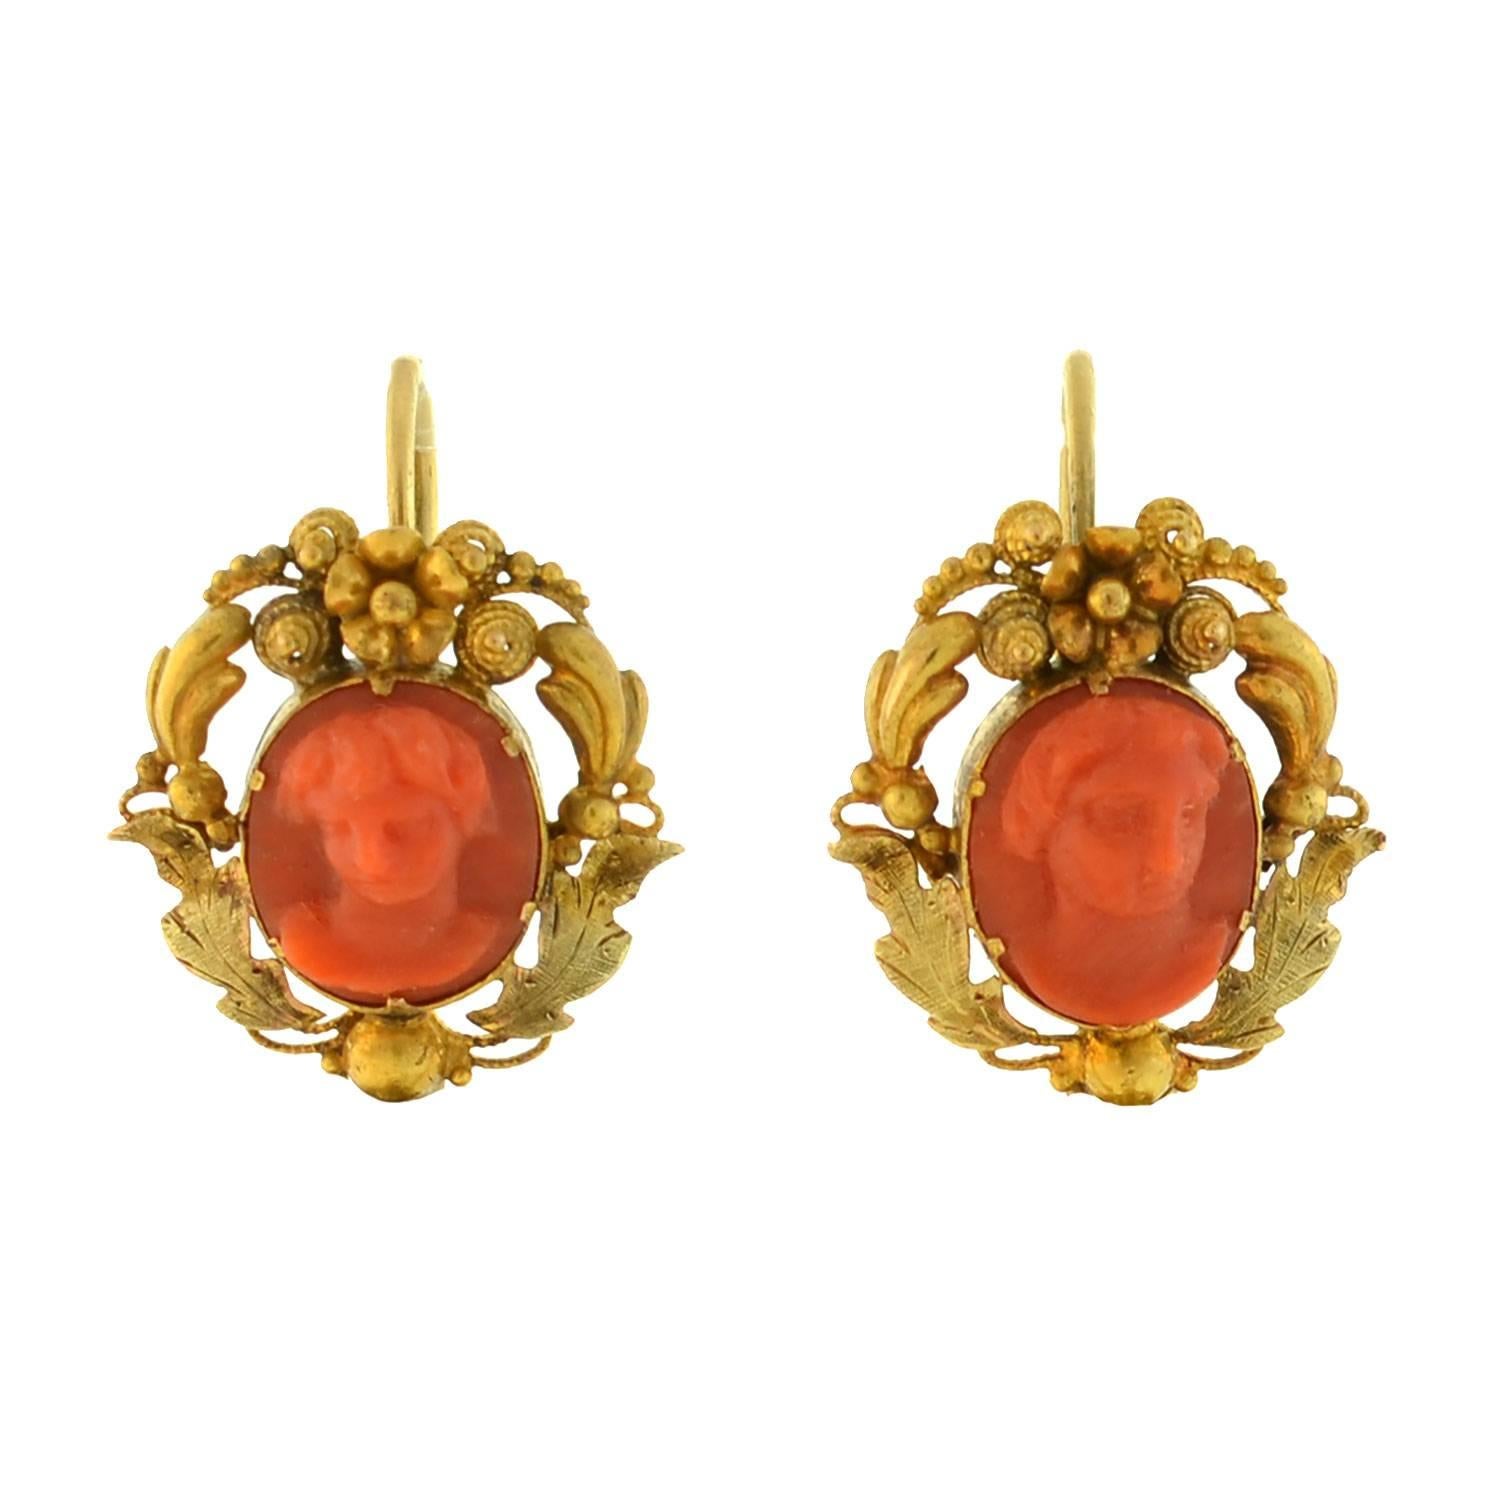 Absolutely incredible cannetille wirework and coral earrings from the early Victorian (ca1850) period! These fantastic earrings are crafted in 18kt yellow gold and are particularly large in size. With a magnificent and royal-looking appearance, each